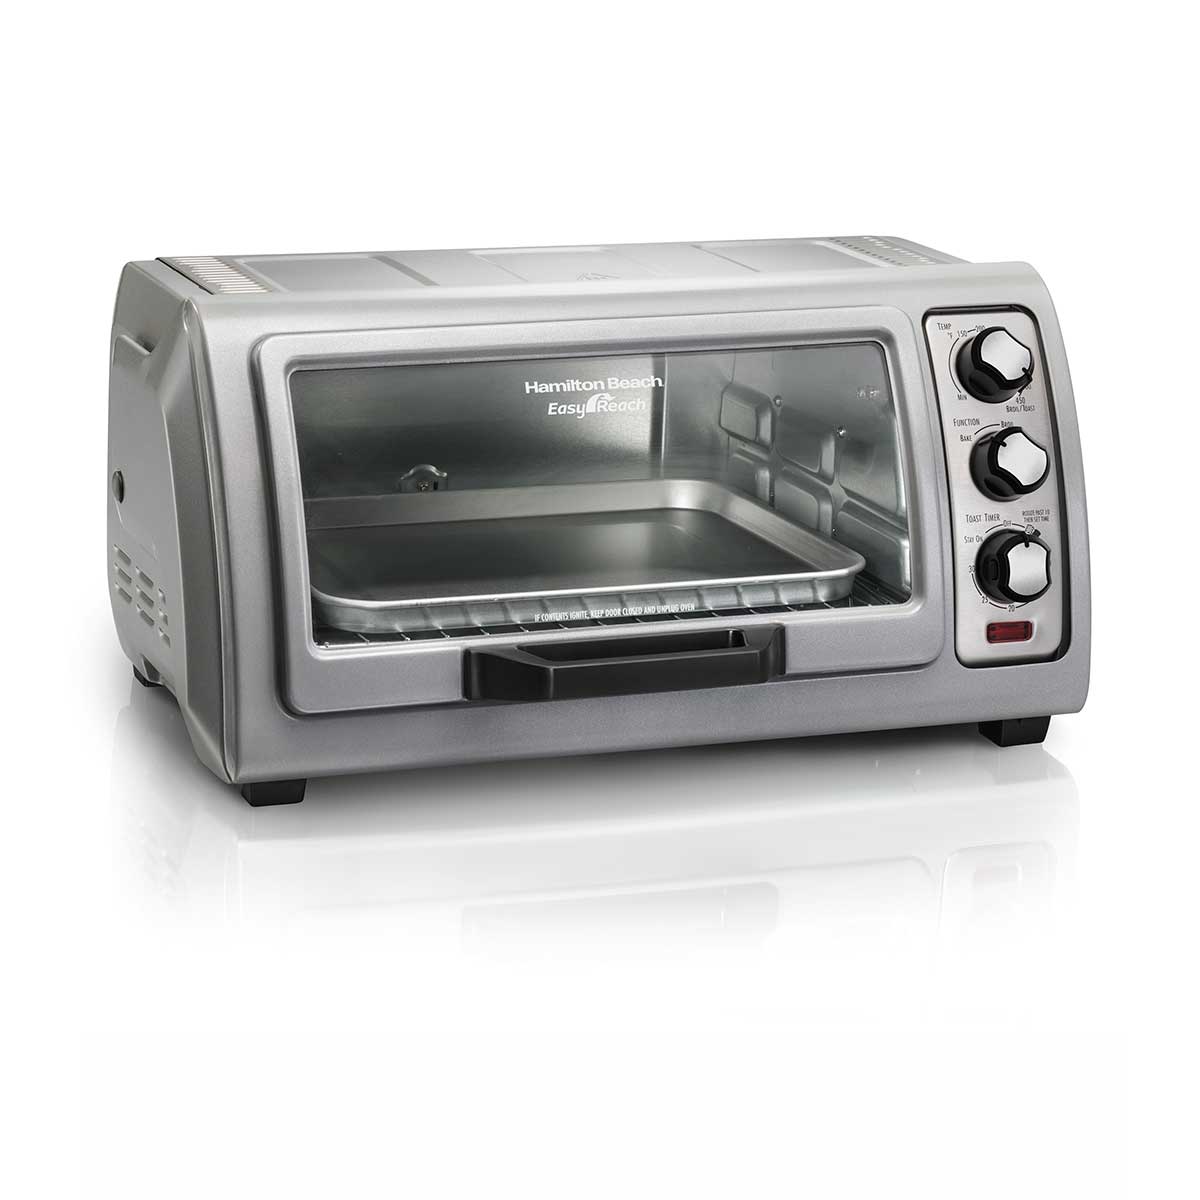 Hamilton Beach® Easy Reach Toaster Oven with Roll-Top Door & Reviews